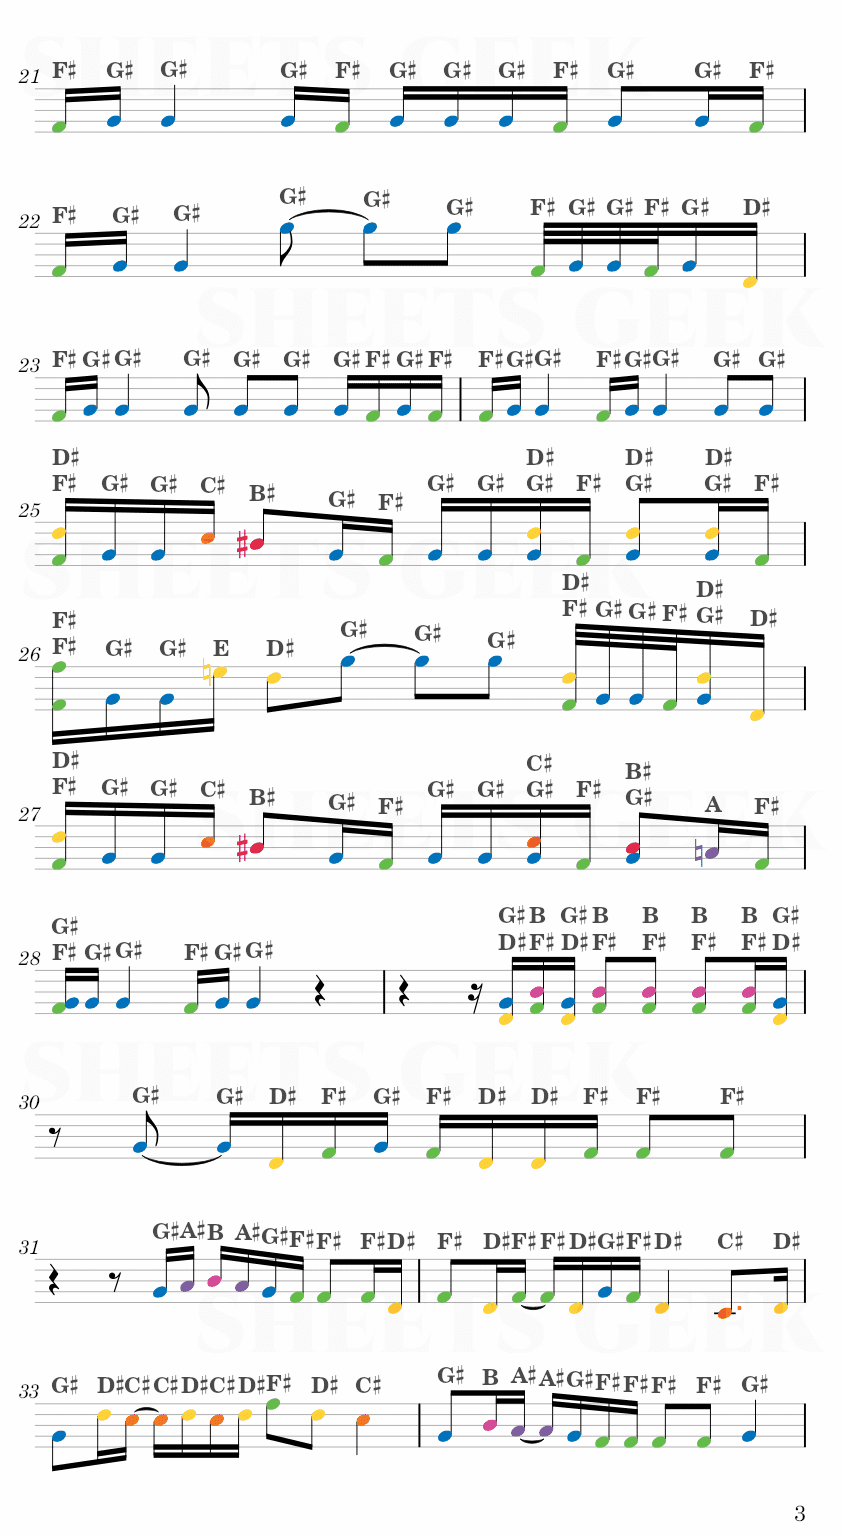 MANIAC - Stray Kids Easy Sheet Music Free for piano, keyboard, flute, violin, sax, cello page 3